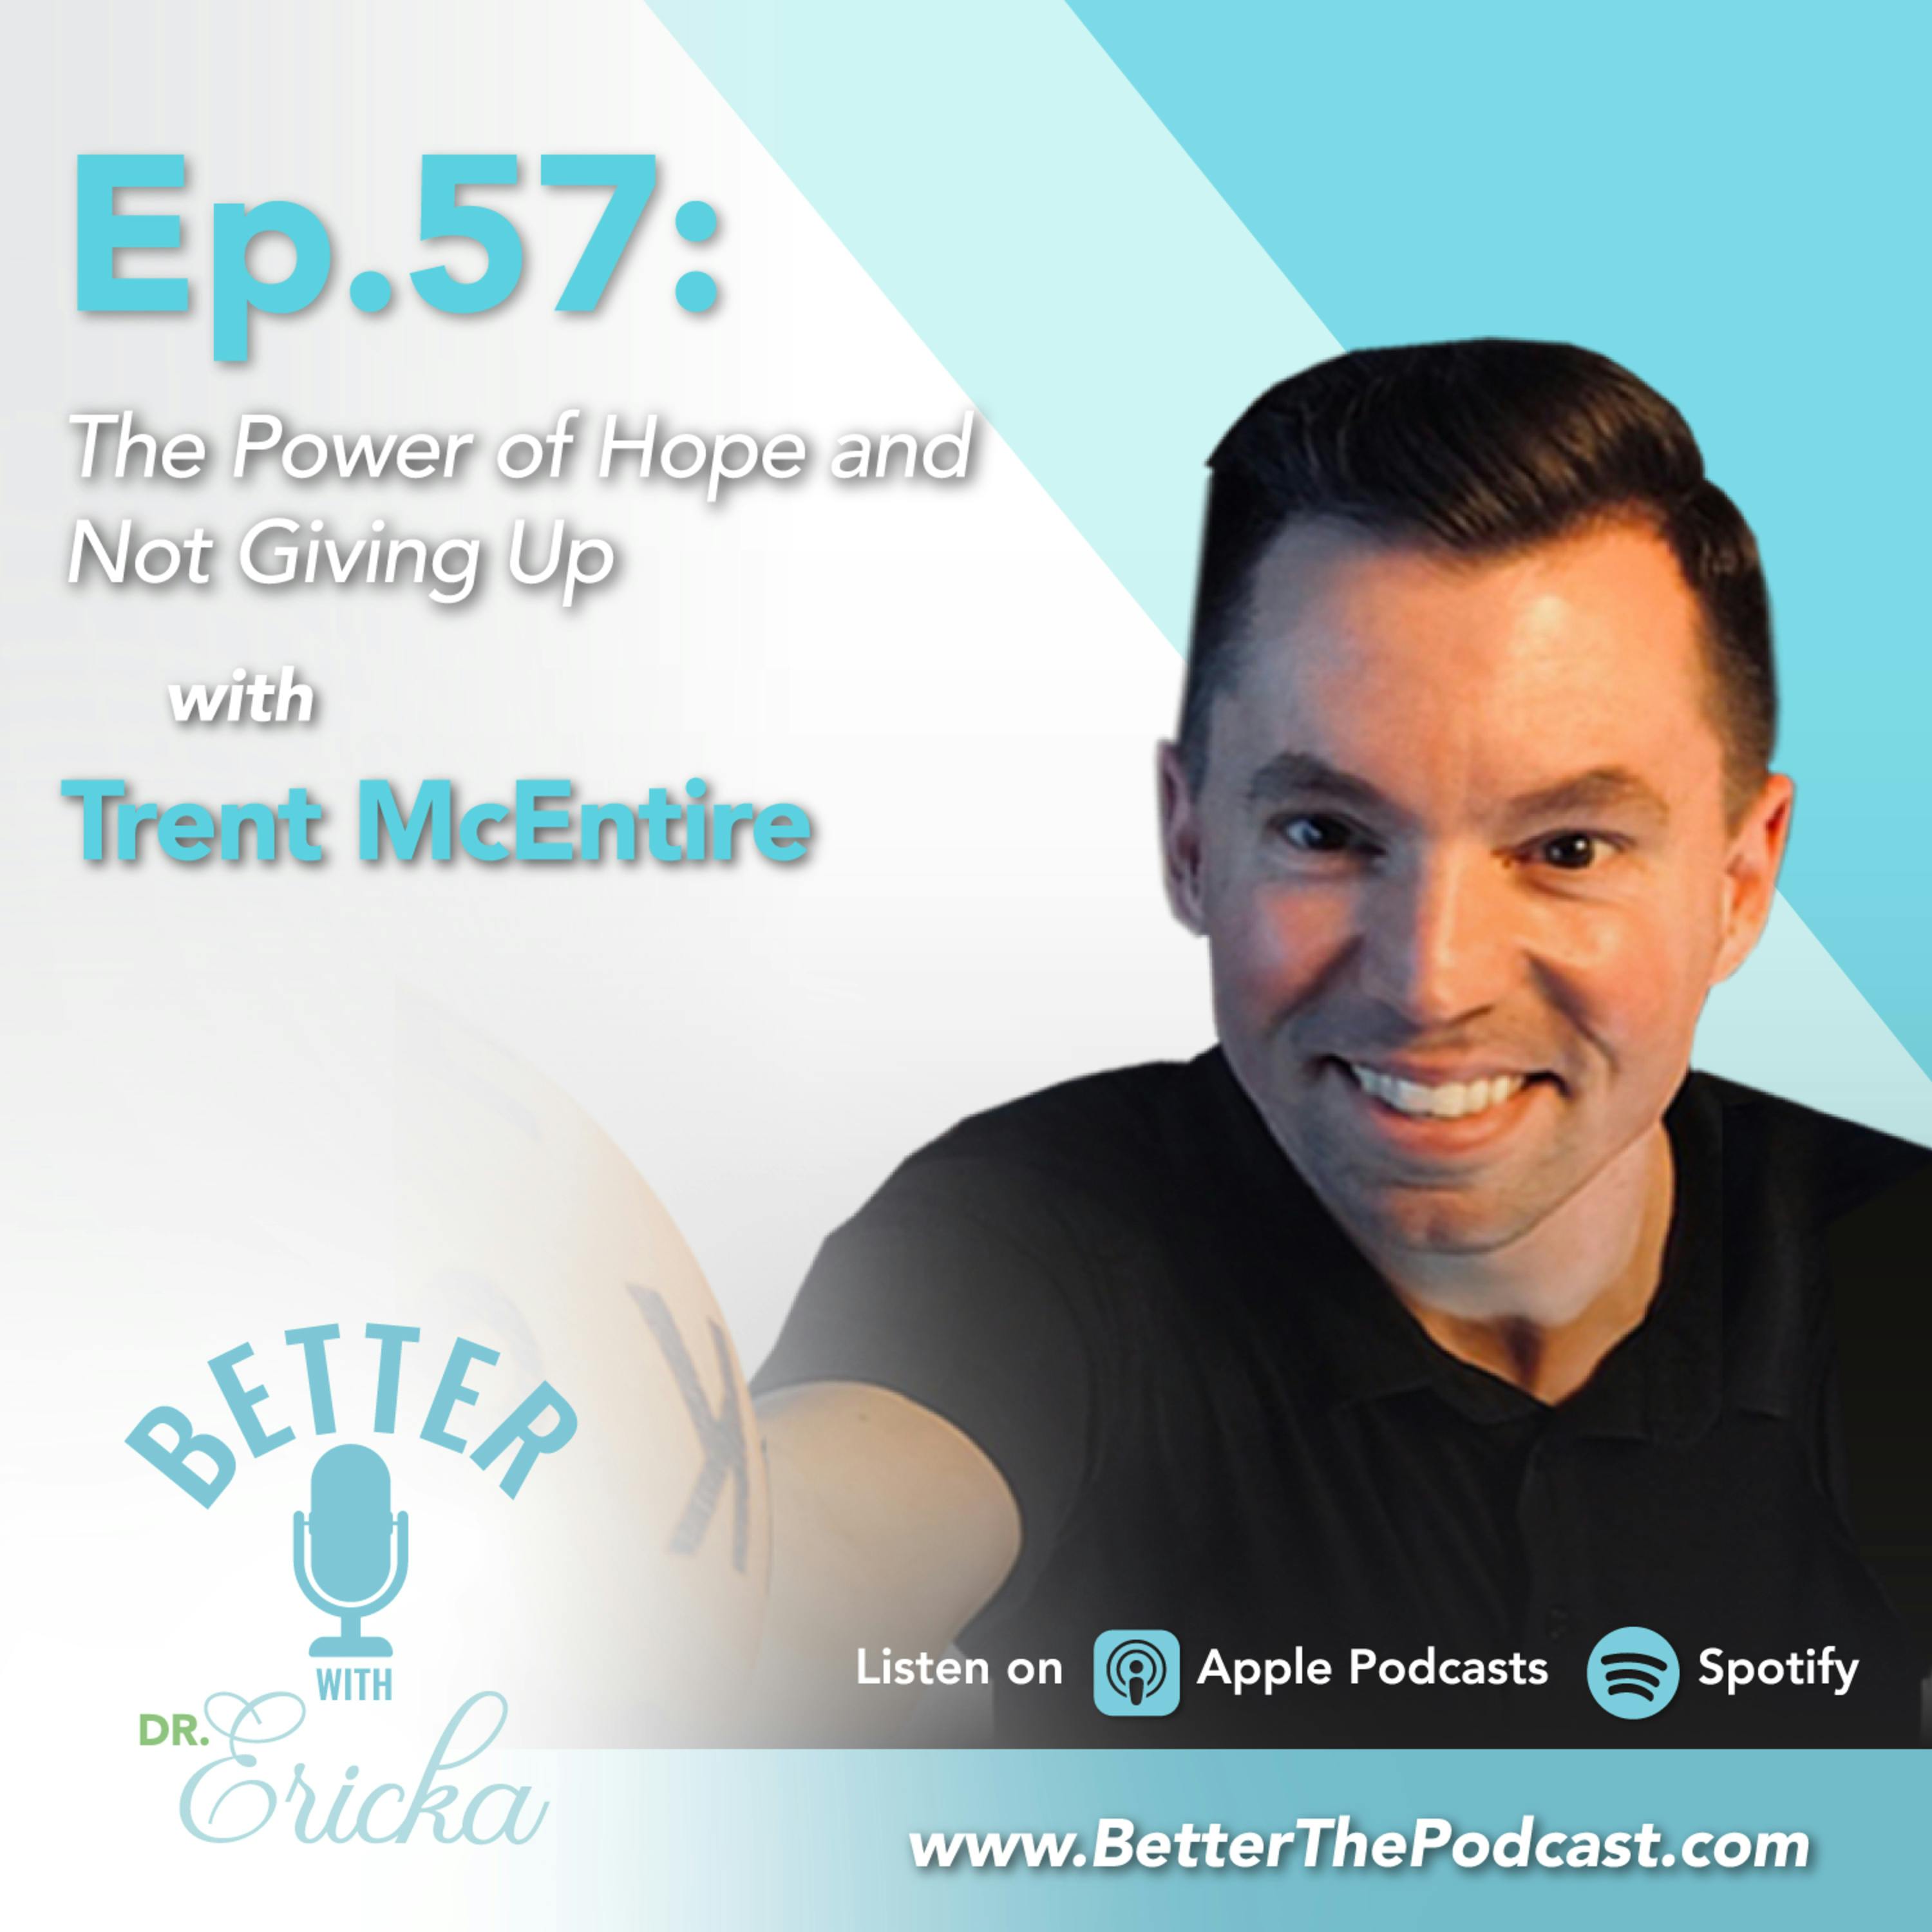 The Power of Hope and Not Giving Up with Trent McEntire